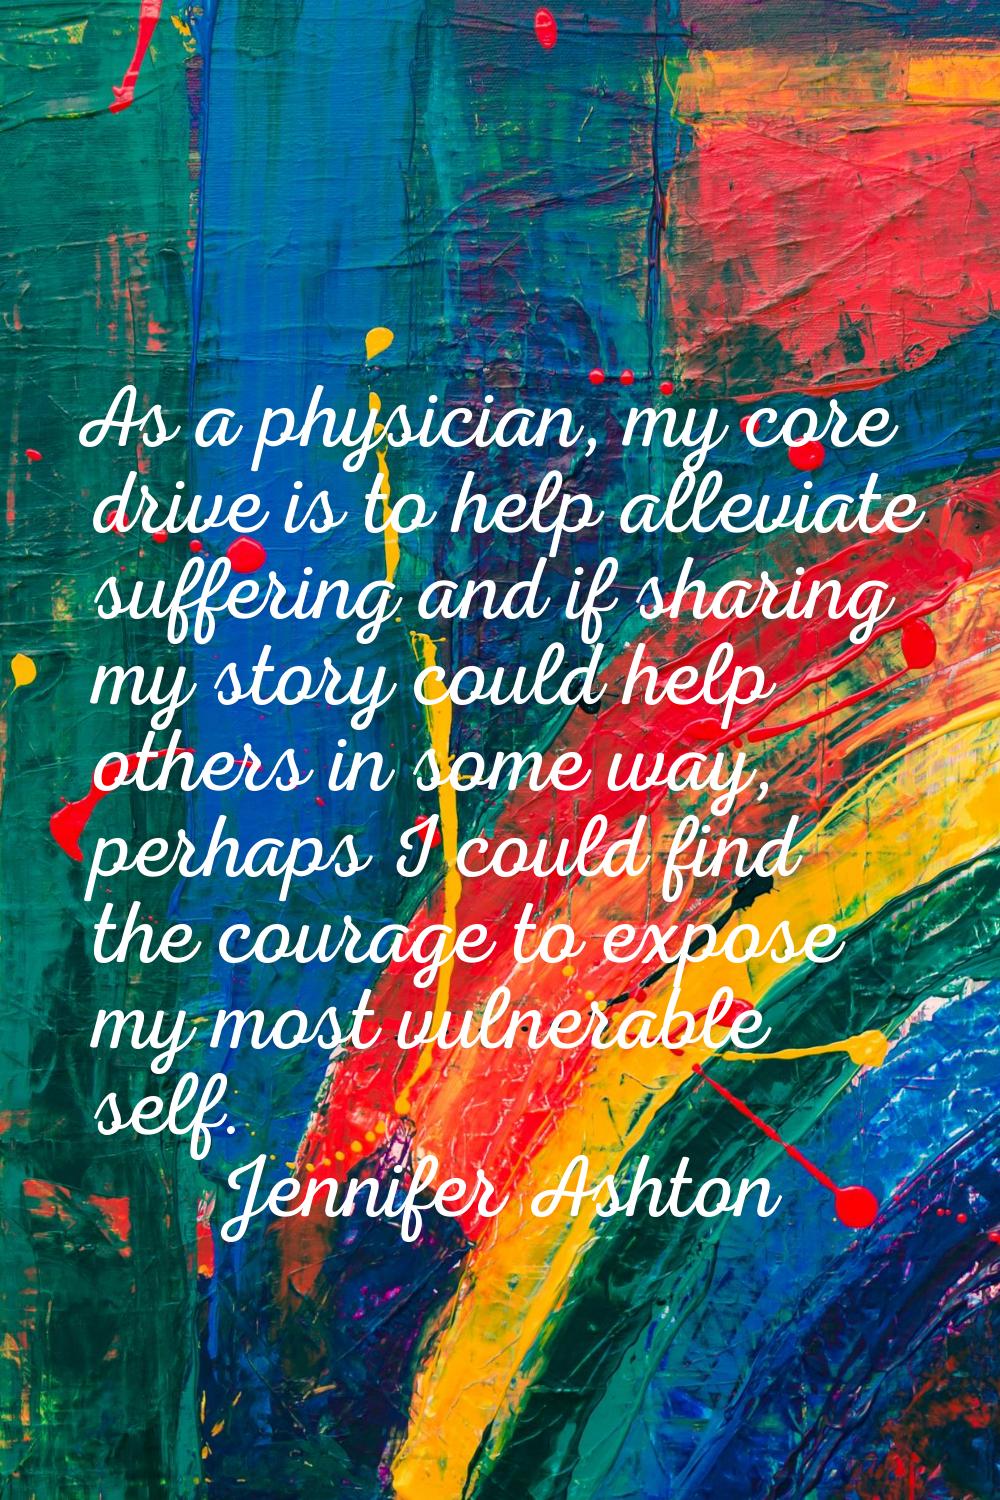 As a physician, my core drive is to help alleviate suffering and if sharing my story could help oth